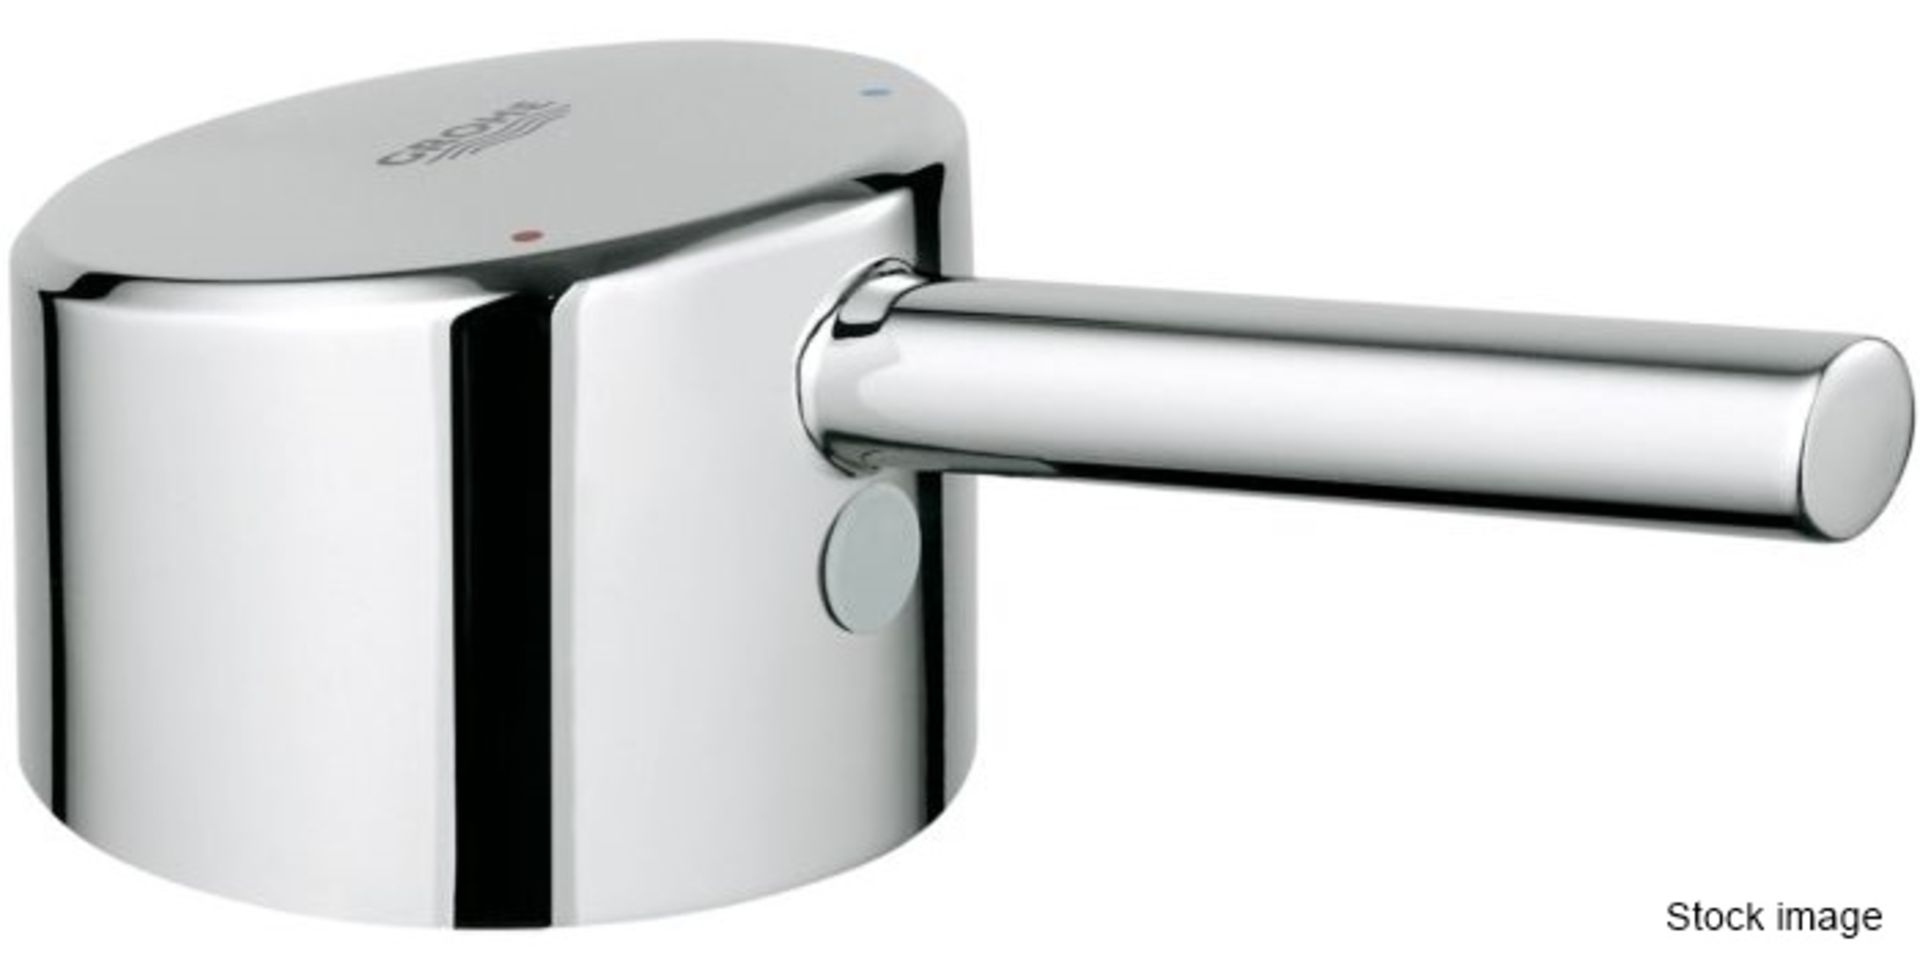 1 x GROHE Tap Lever In Chrome - Ref: 46753000 - Original RRP £88.00 - New & Boxed Stock - CL406 -